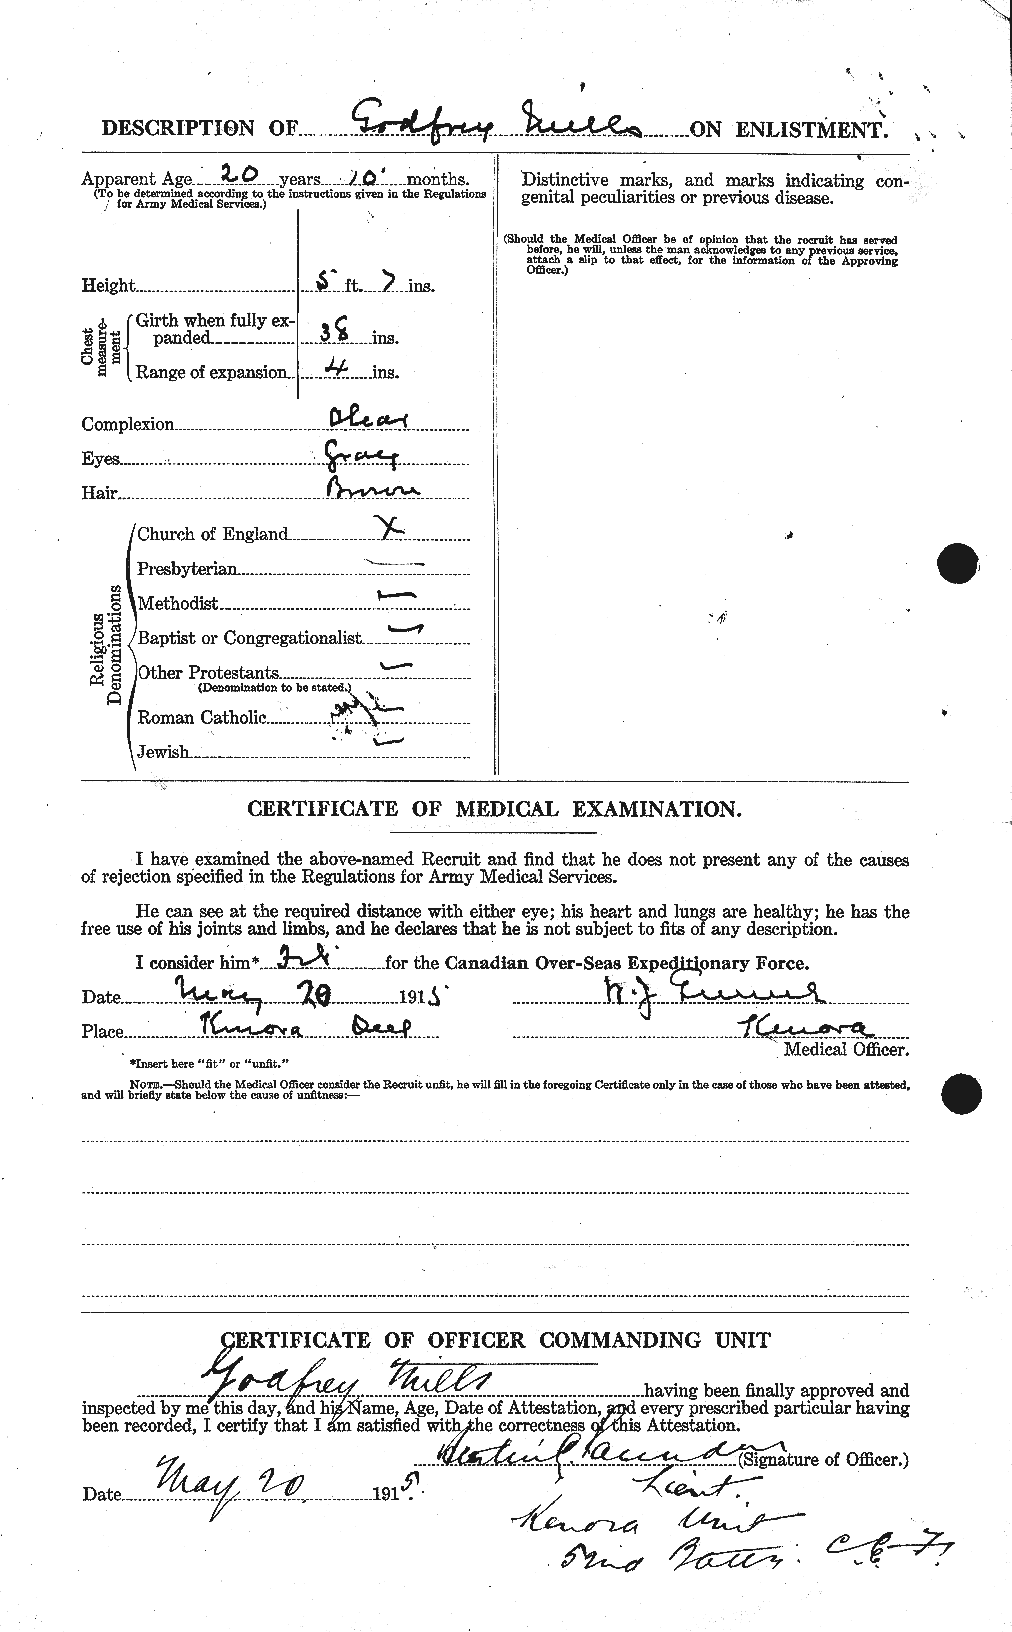 Personnel Records of the First World War - CEF 498220b